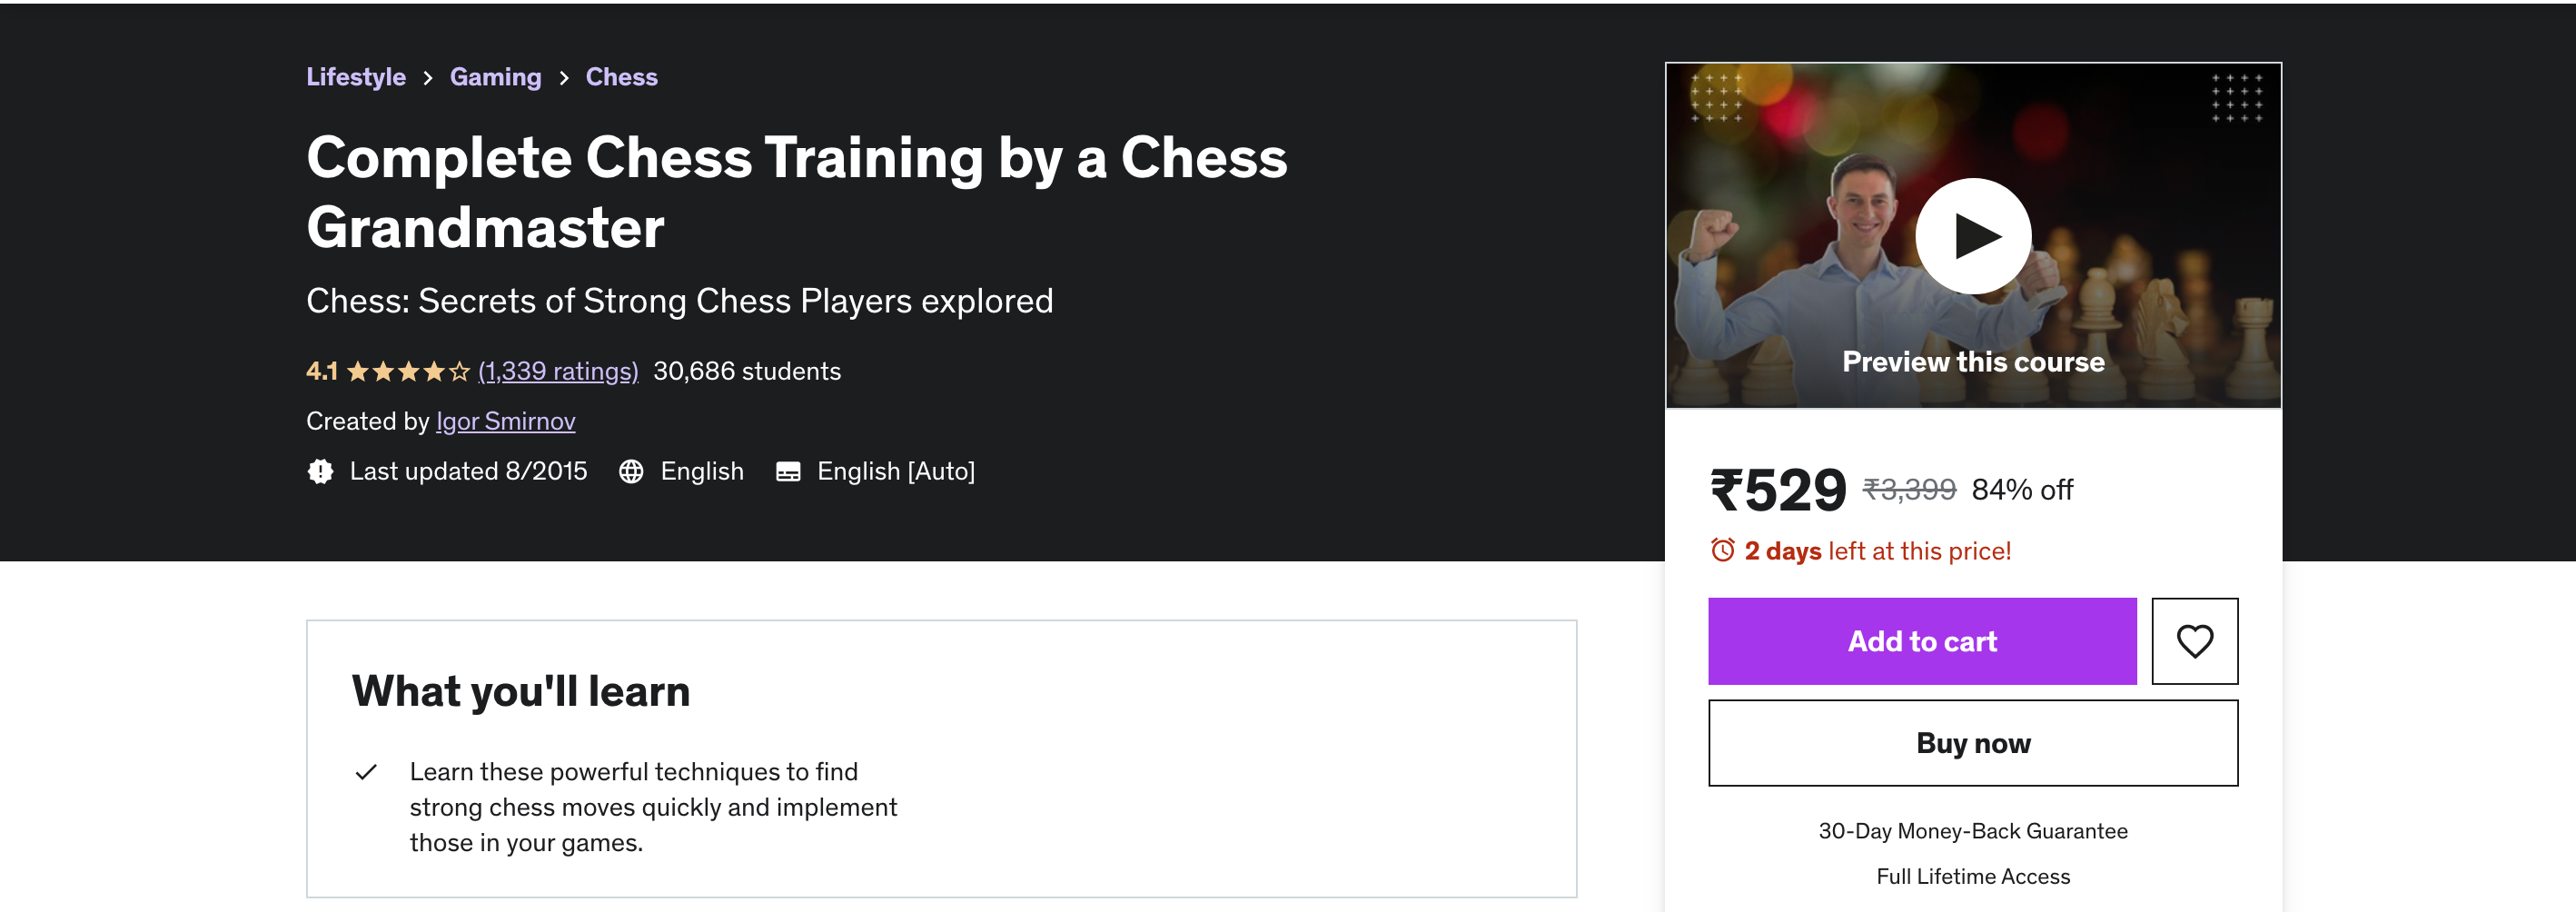 Complete Chess Training by a Chess Grandmaster